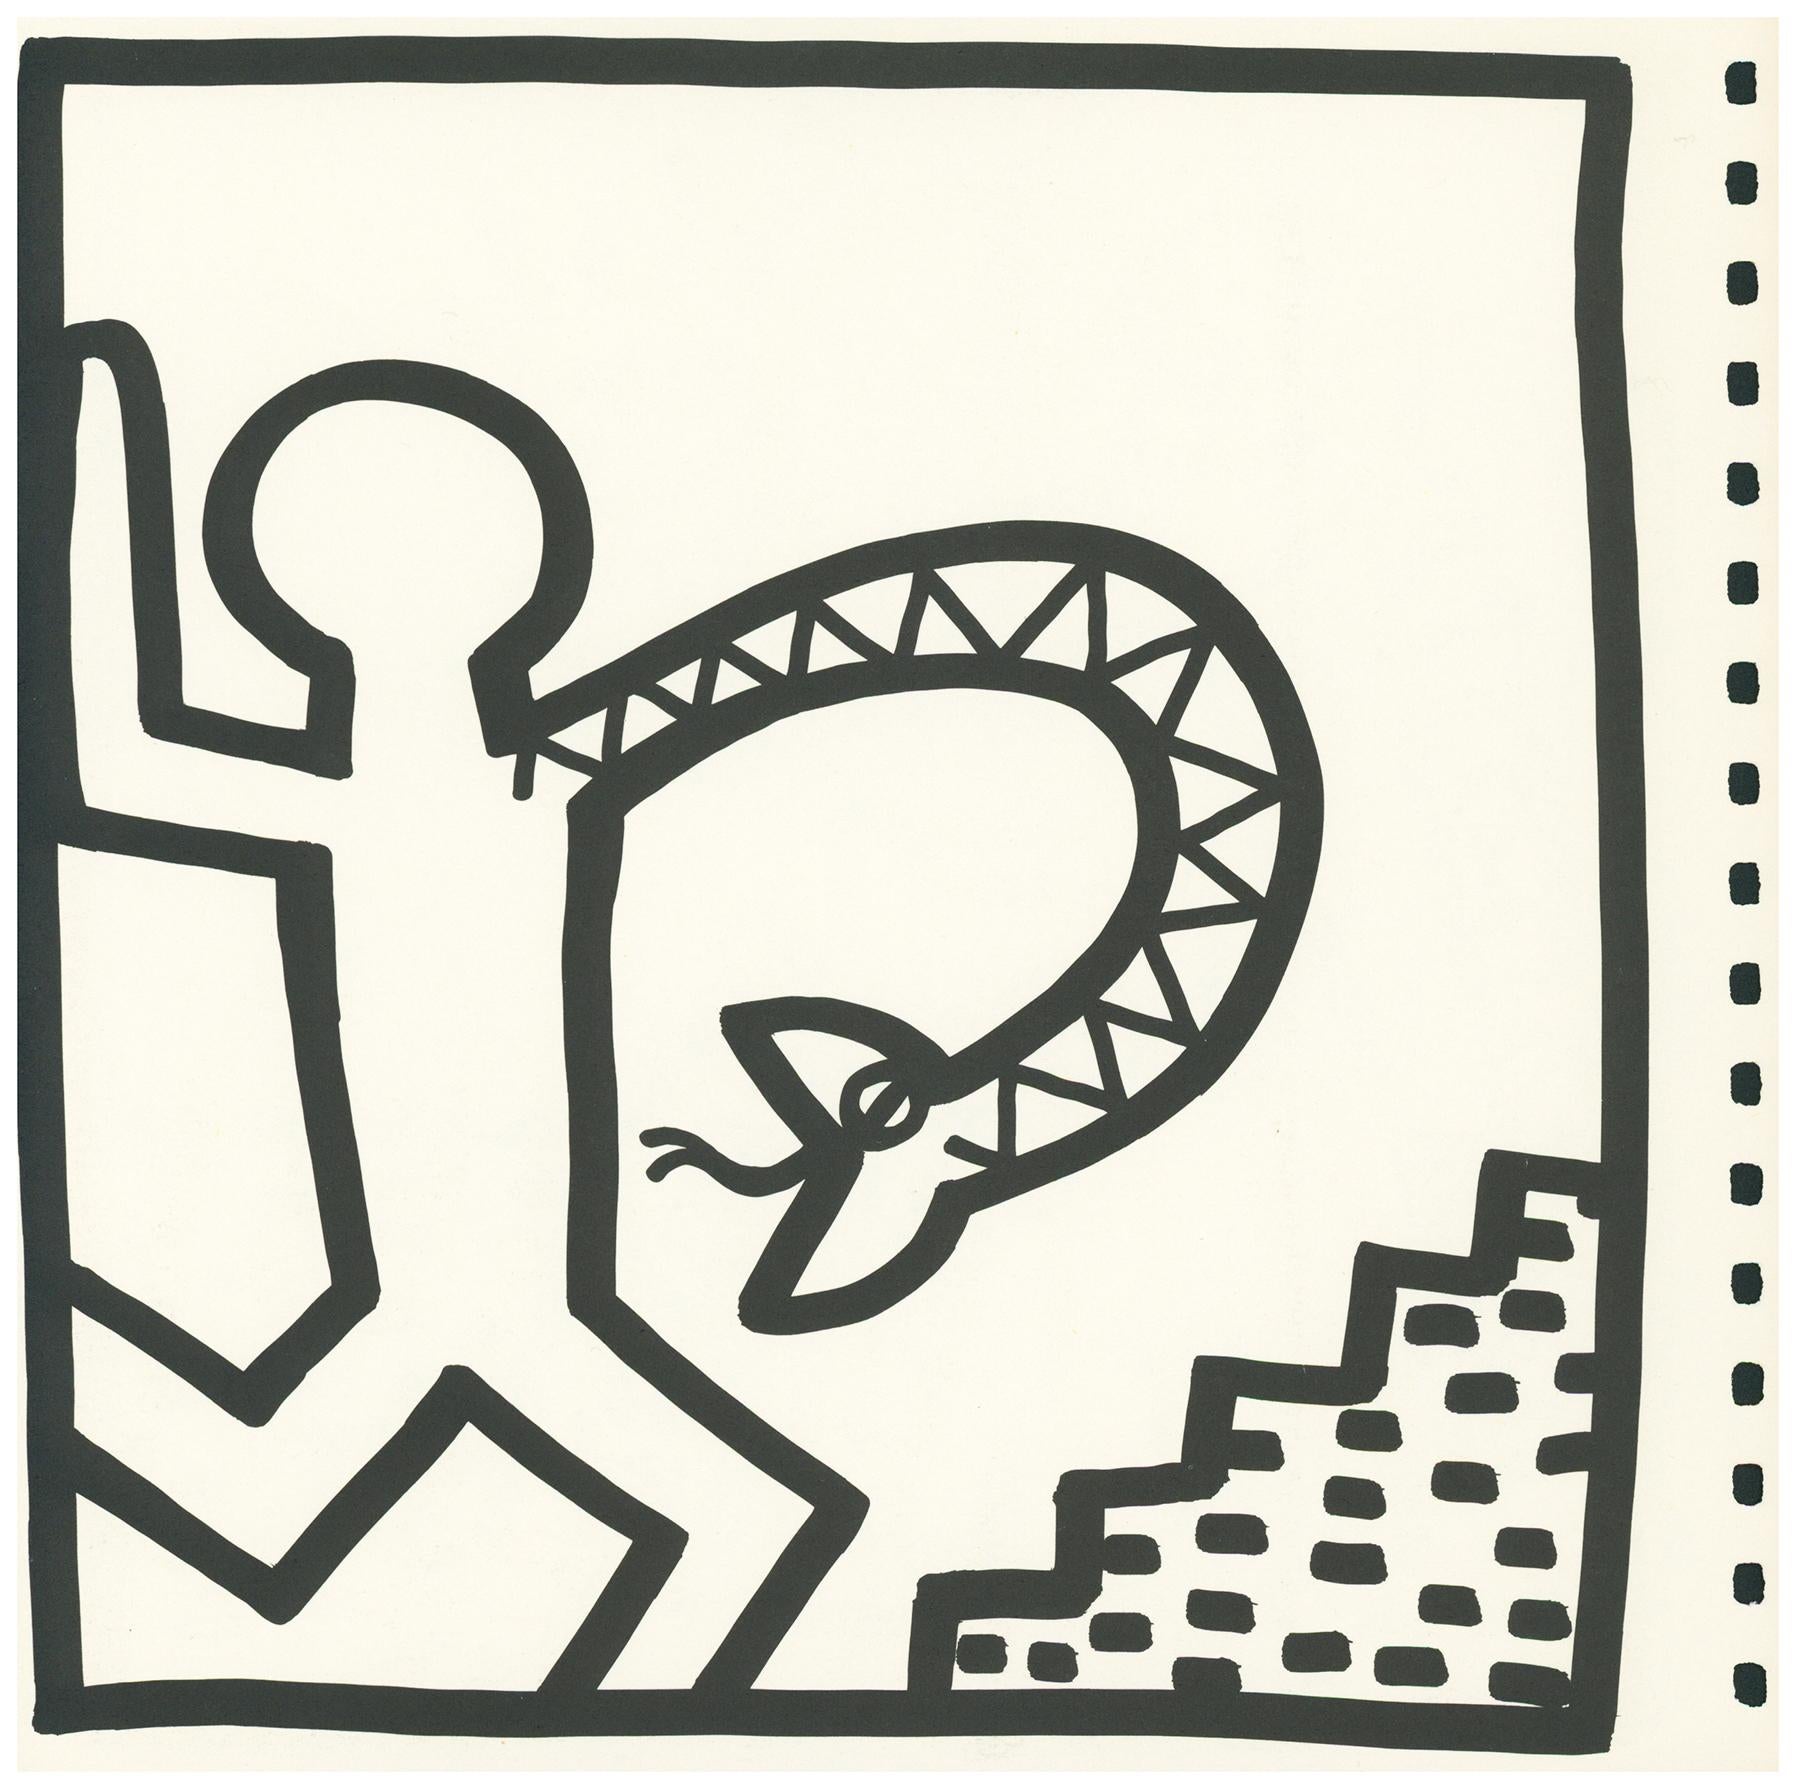 Keith Haring (untitled) Telephone lithograph 1982 (Keith Haring 1982)  - Pop Art Print by (after) Keith Haring